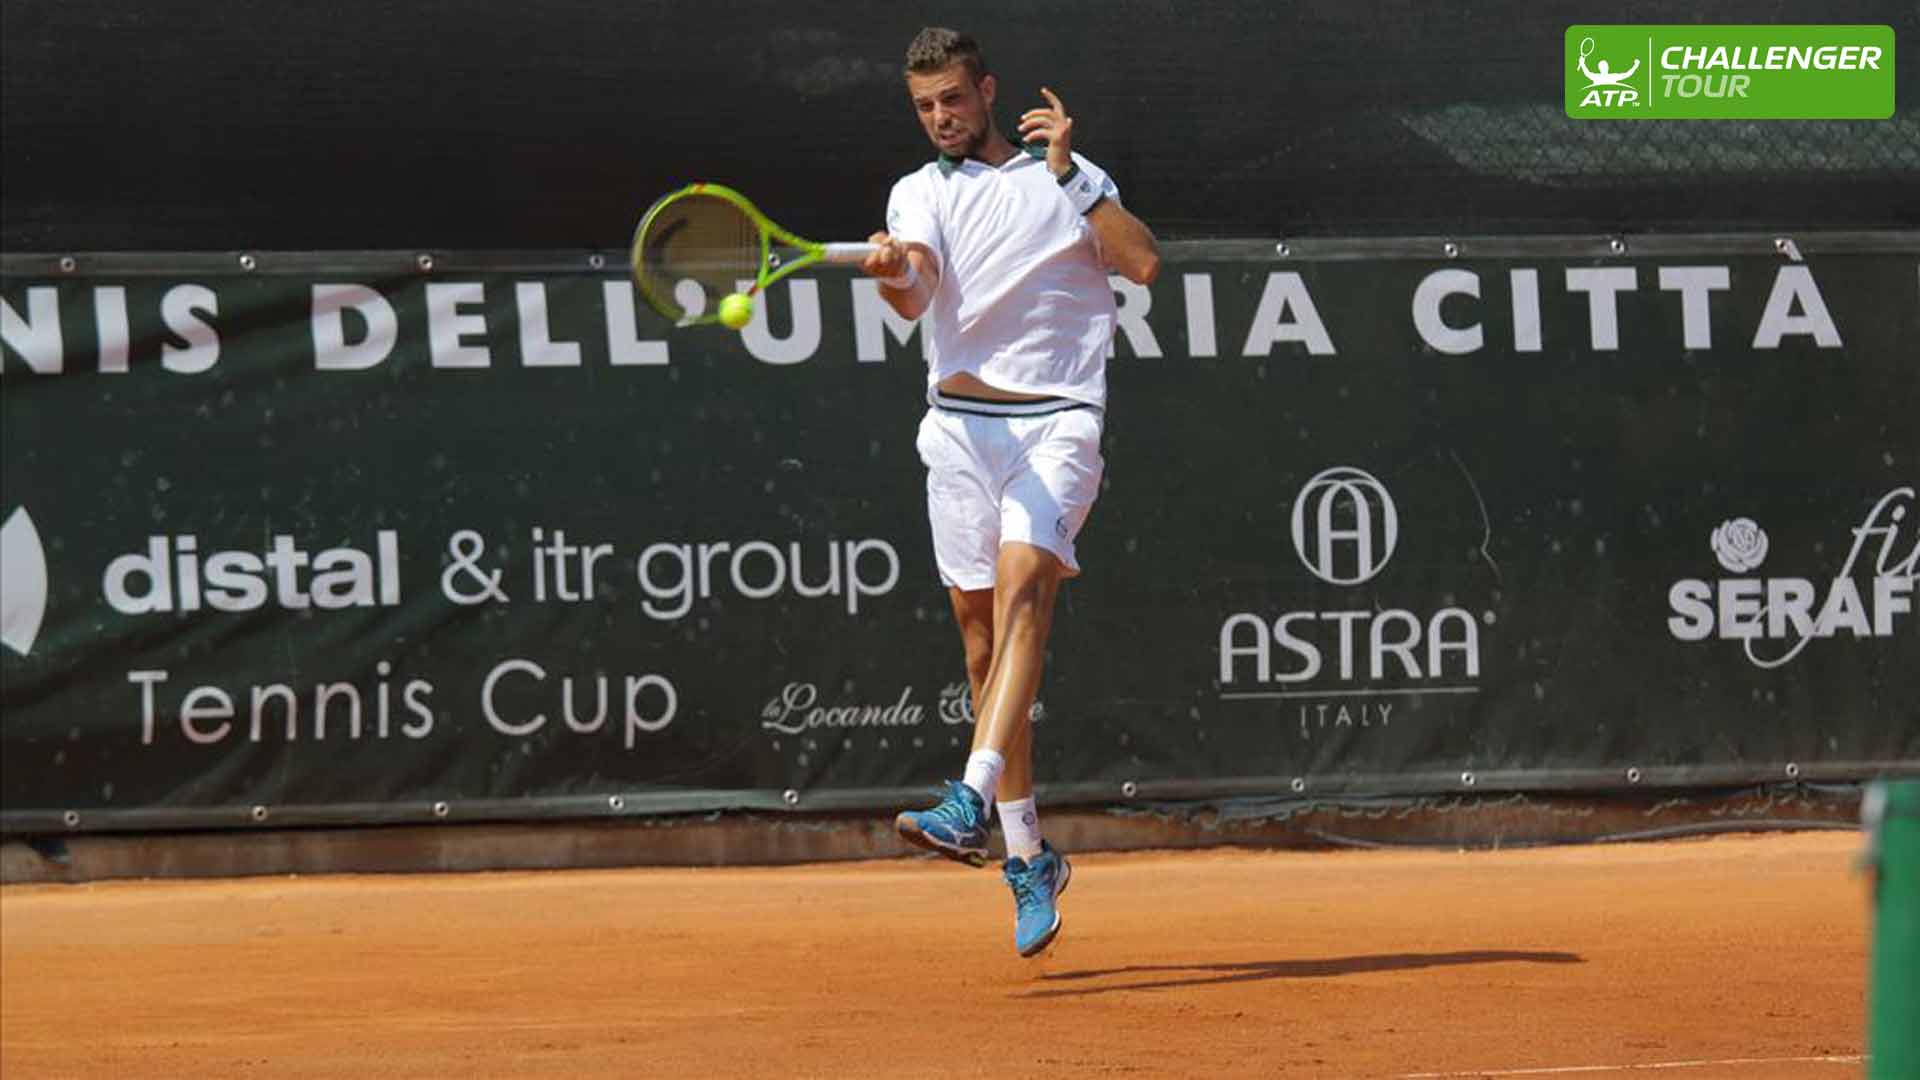 Stefano Napolitano has won five of his past six matches on the ATP Challenger Tour.